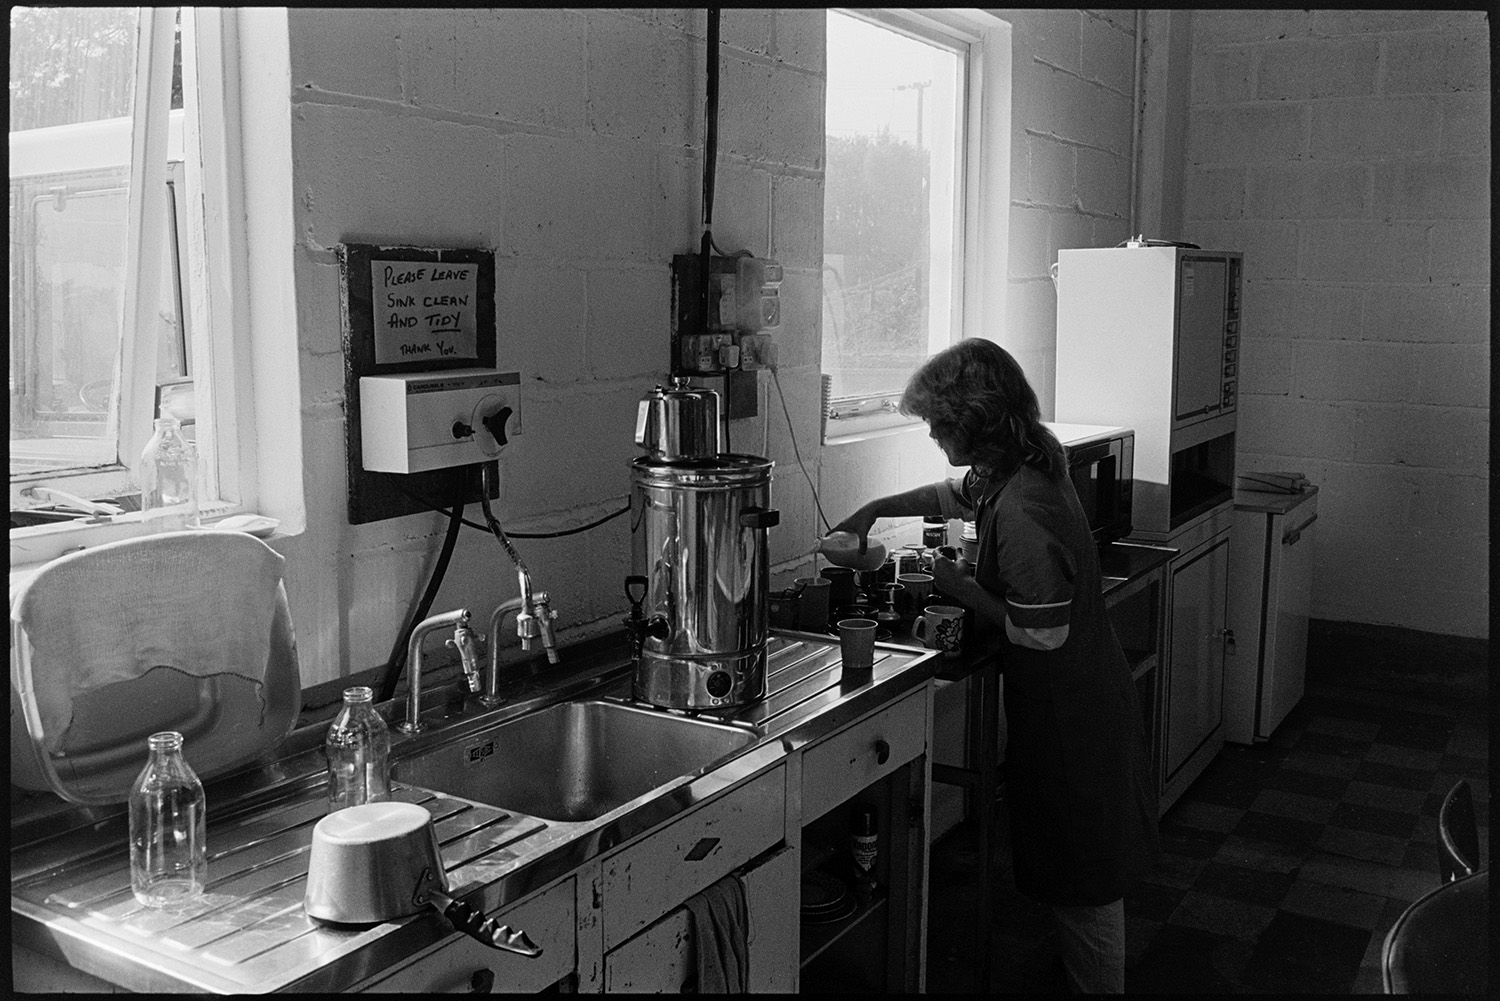 Inside transformer factory men testing, making, designing transformers, canteen sink. 
[A woman adding milk to cups of tea or coffee in the canteen at Apex Transformers at Pathfields Business Park, South Molton. A sink, urn, microwave and fridge can be seen in the canteen.]